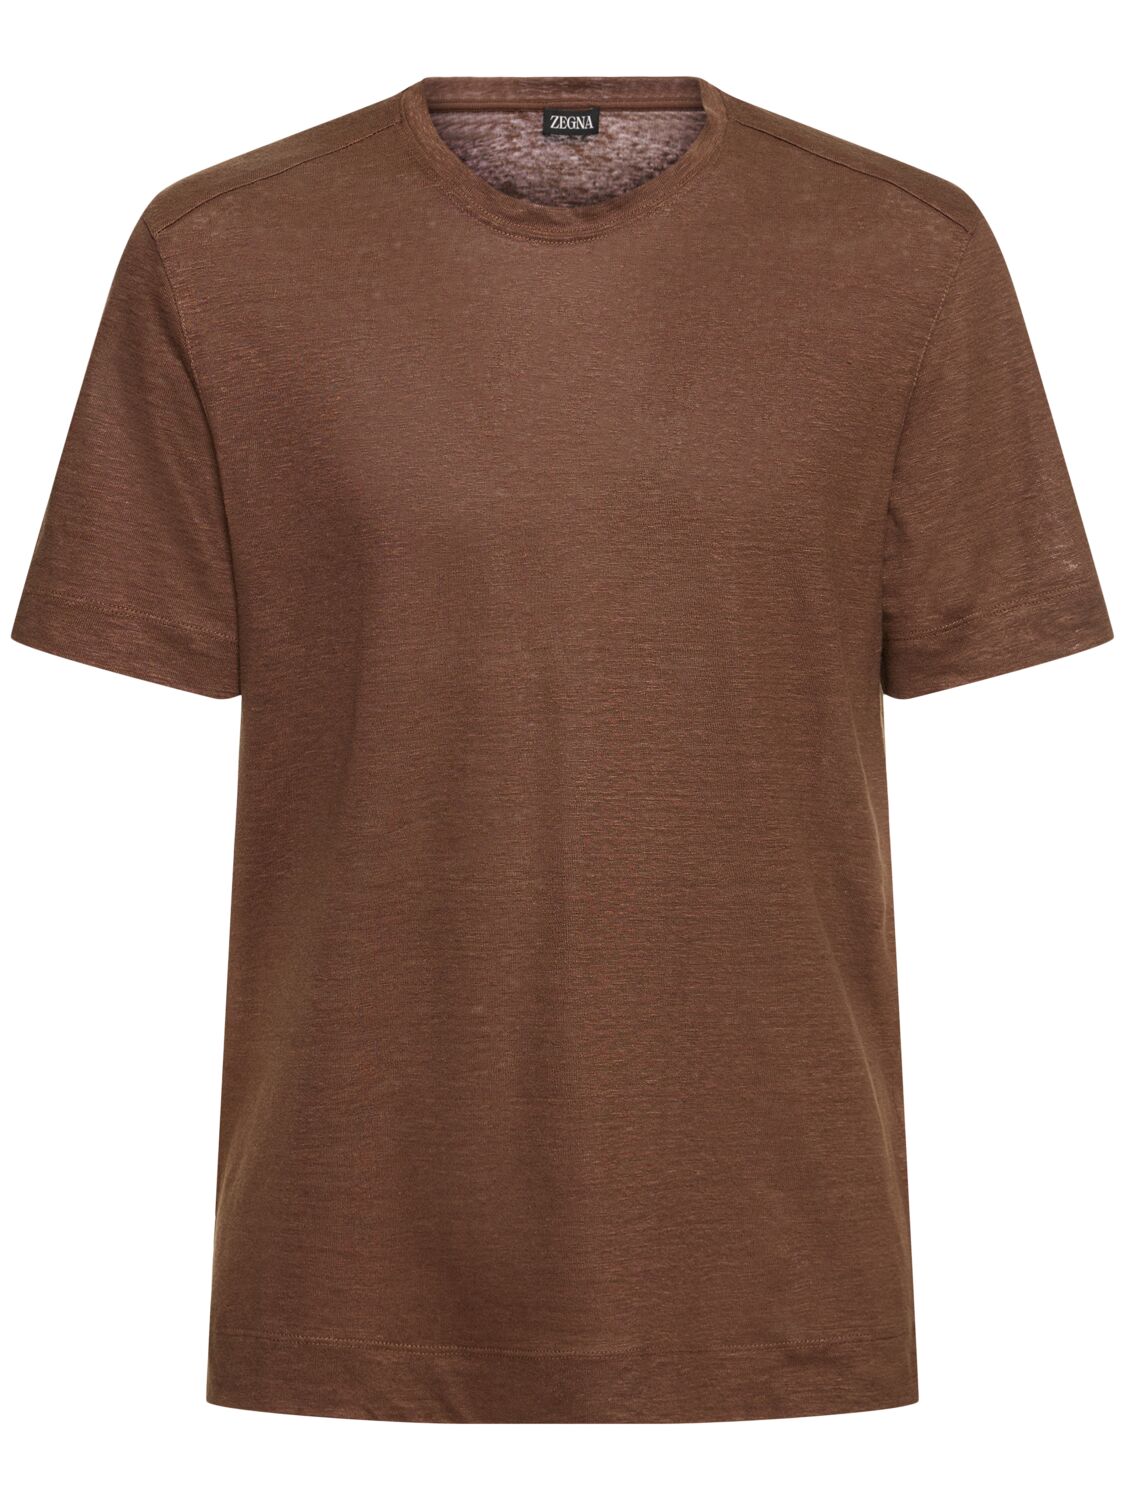 Zegna Pure Linen Jersey T-shirt In Tobacco